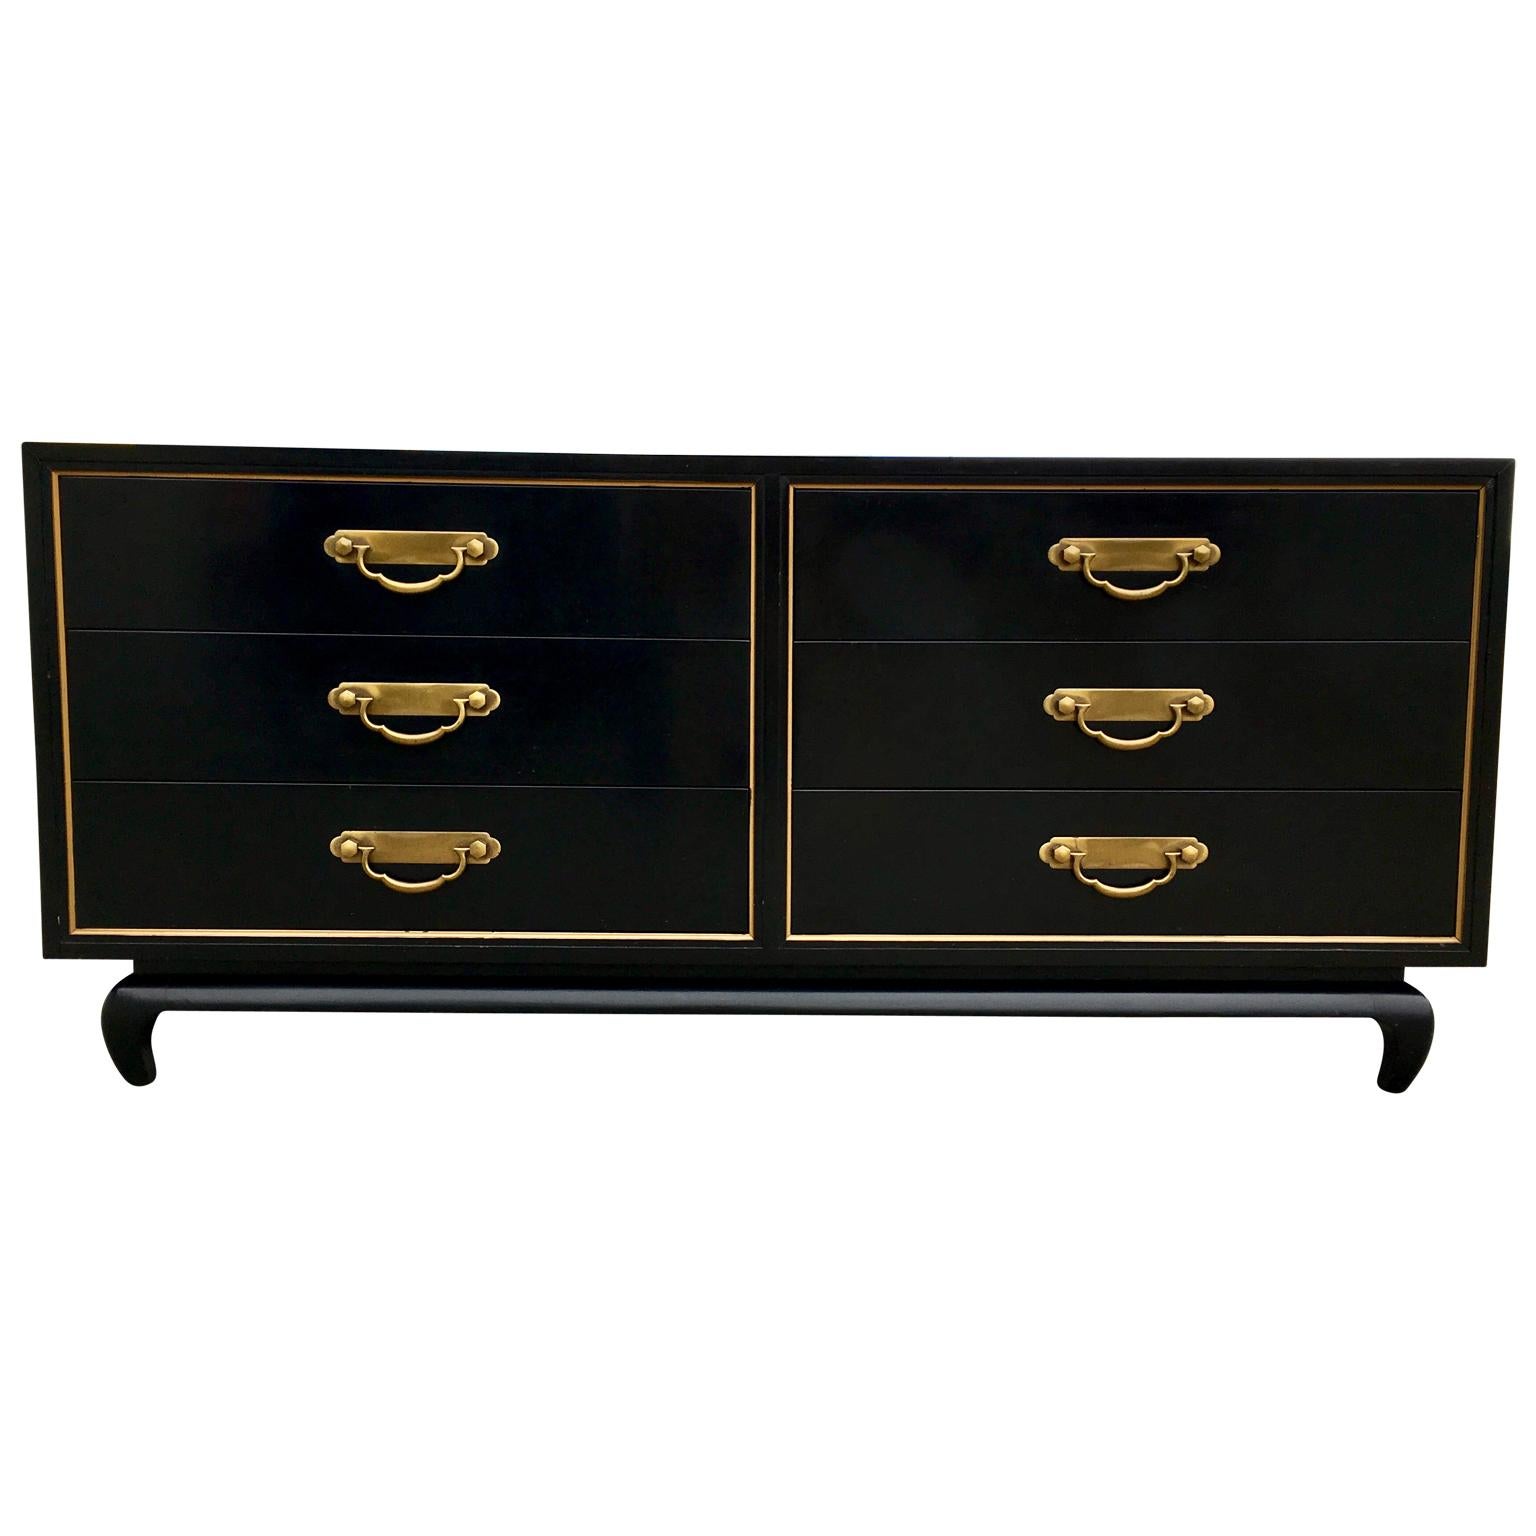 A exquisite black lacquered Mid-Century Modern Asian chest by American of Martinsville. Great design, nice large brass pulls. Original gold line detail. All original condition. Solid wood construction.